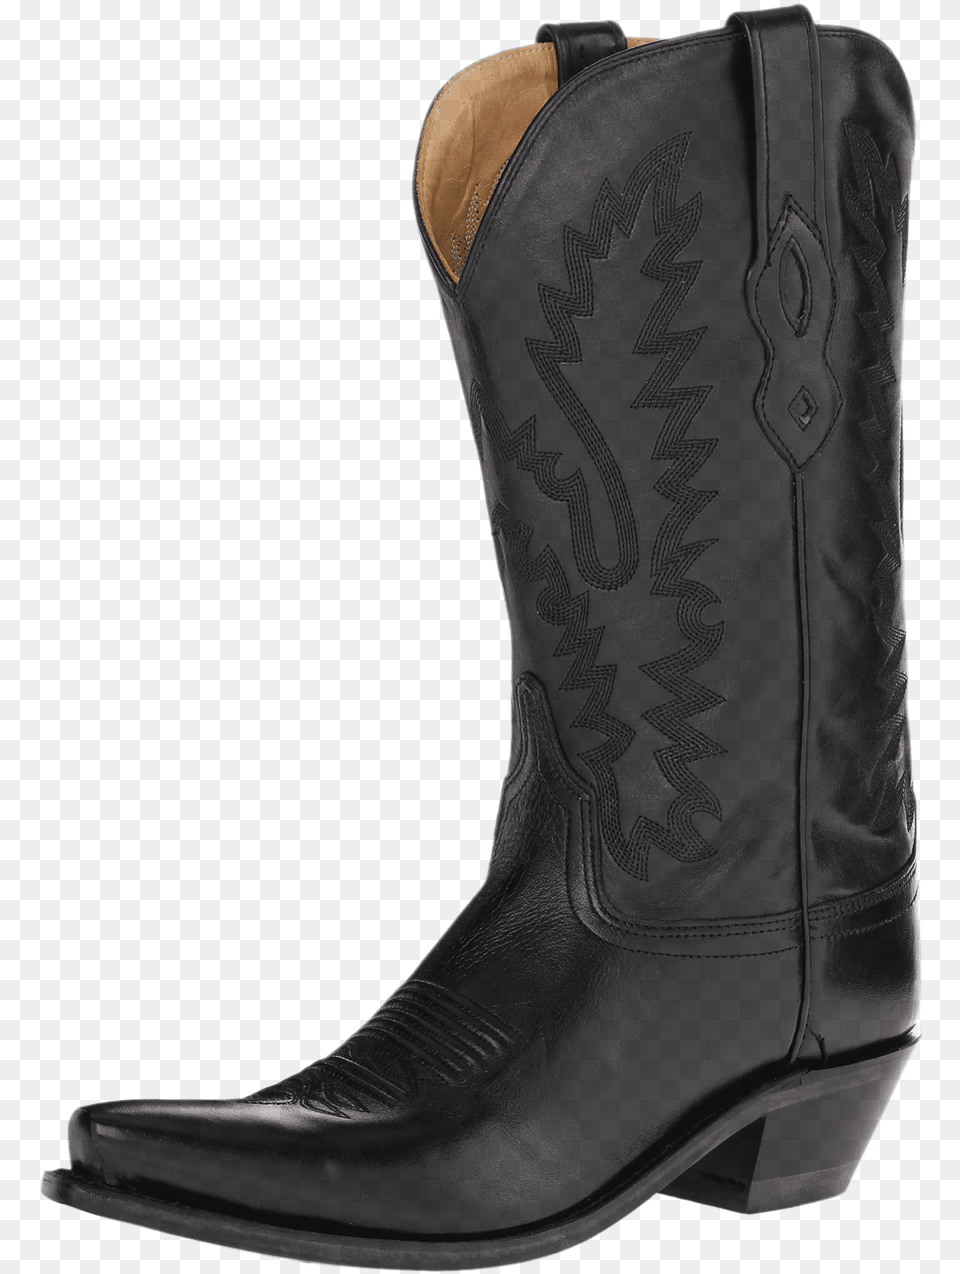 Cowgirl Boots Black, Boot, Clothing, Footwear, Cowboy Boot Png Image